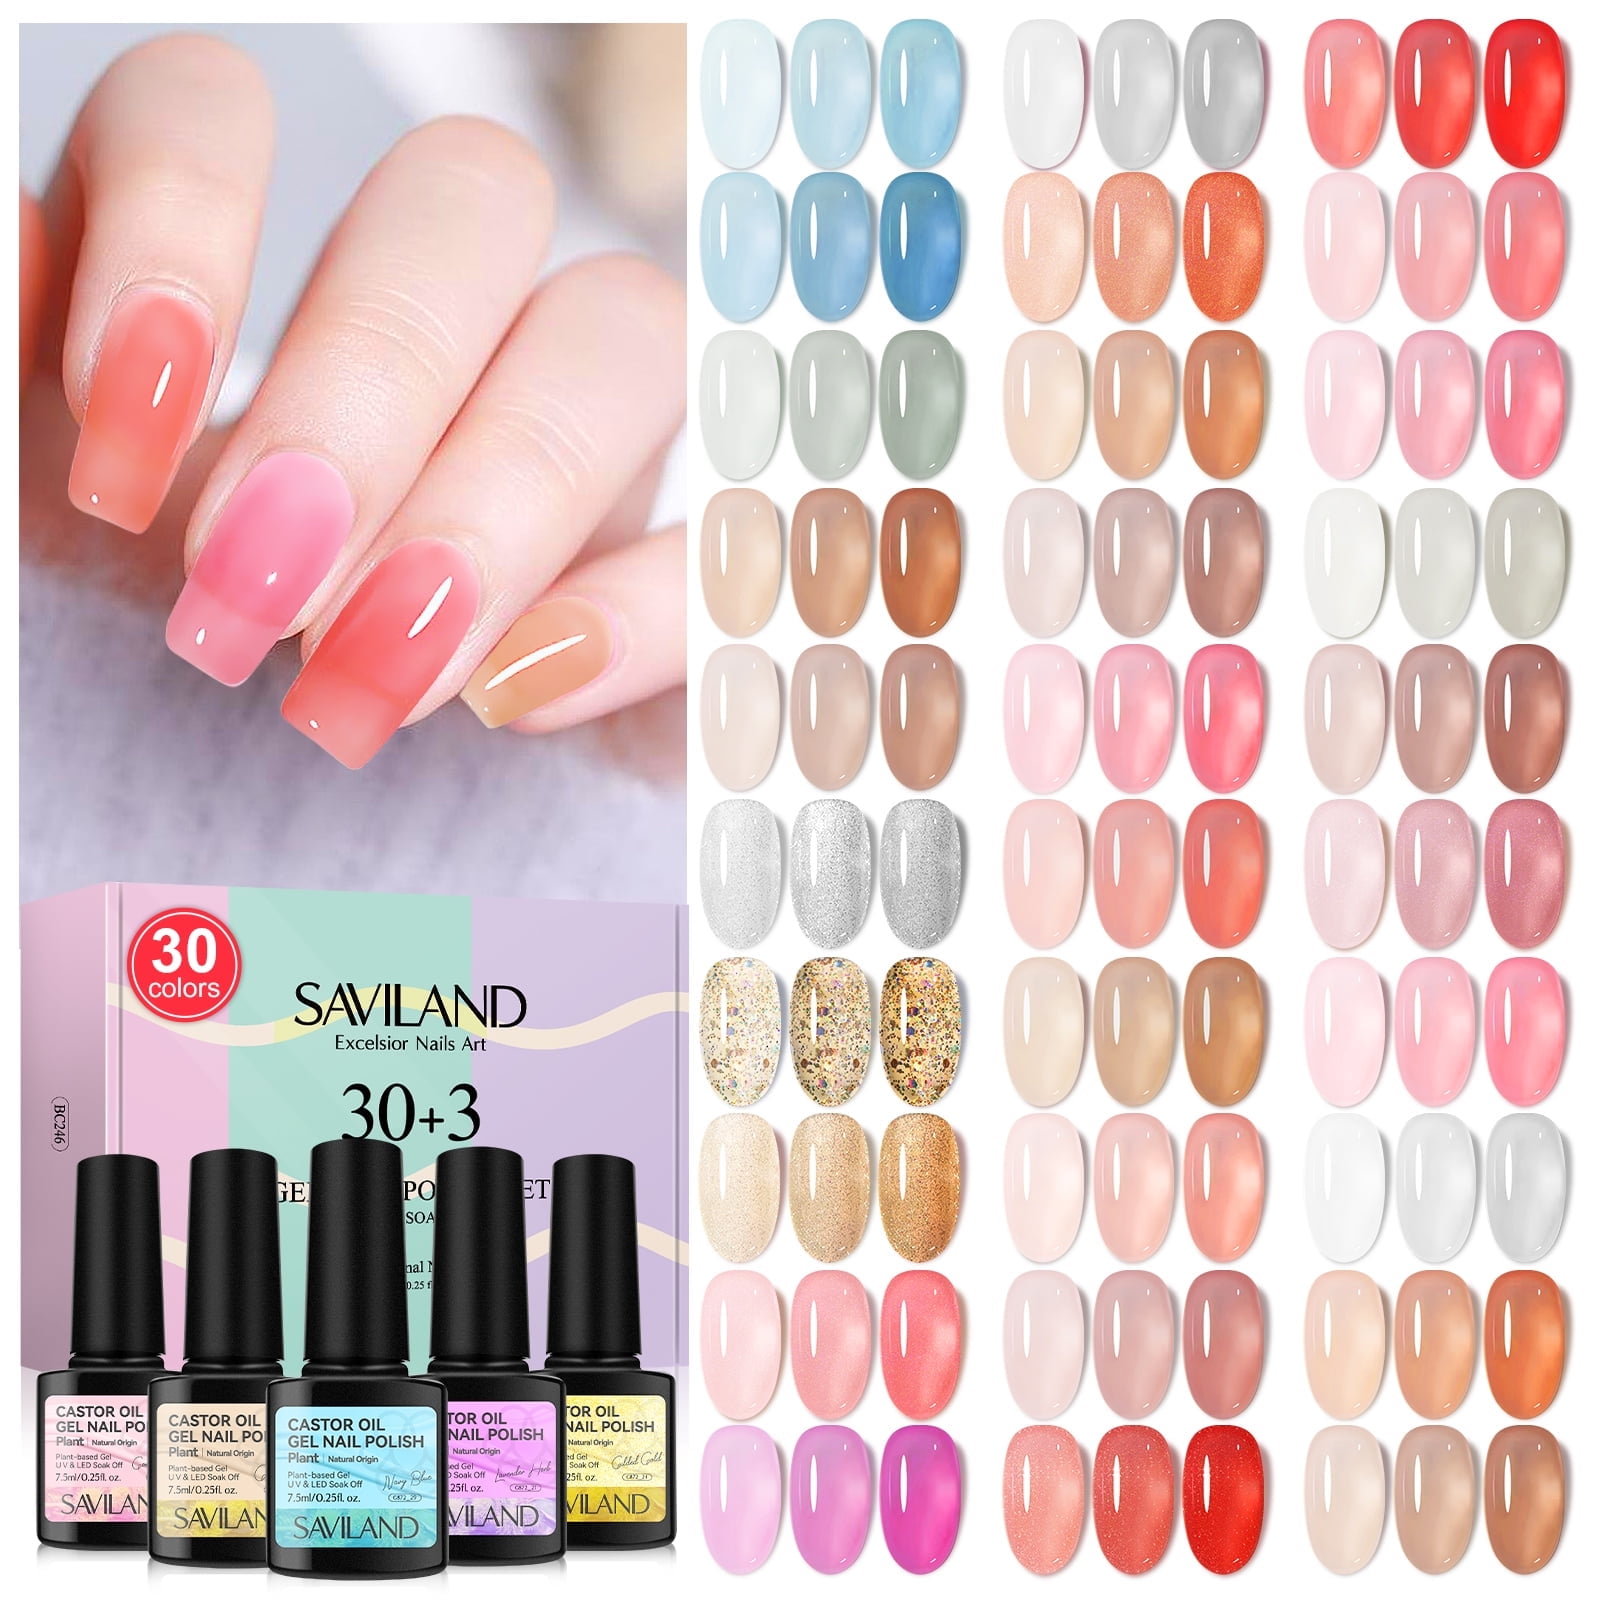 Nail Dotting Pen Set Waterproof, Acrylic, 3D Abstract, Beauty Manicure,  Graffiti, Painting Liner From Heng04, $11.05